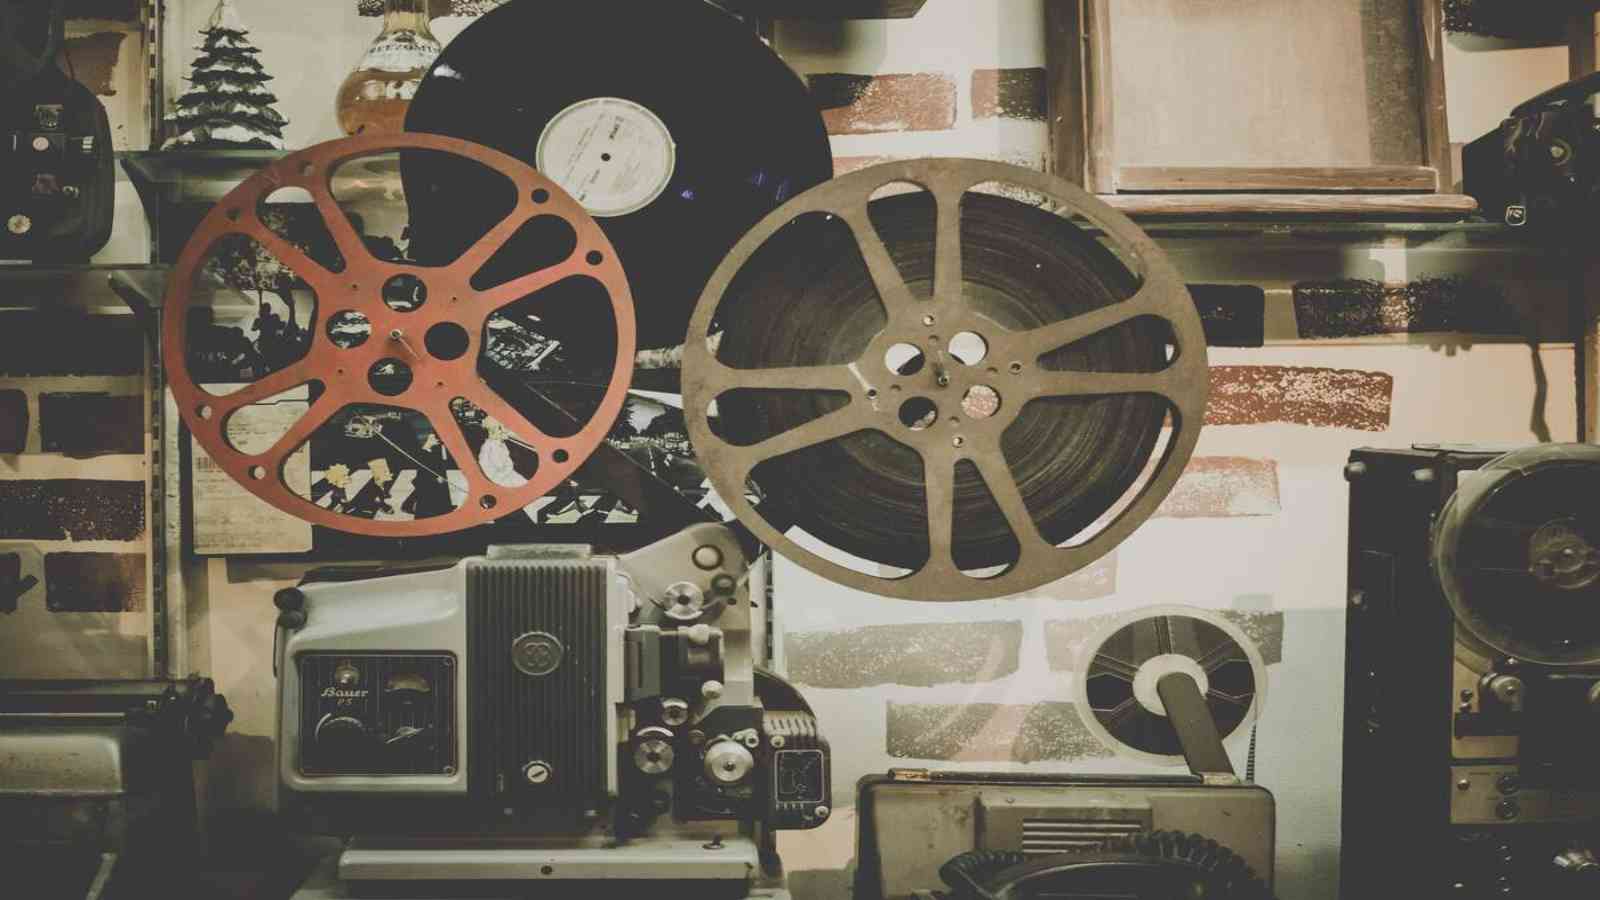 Reel Film Day 2023: Date, History, Facts, Activities